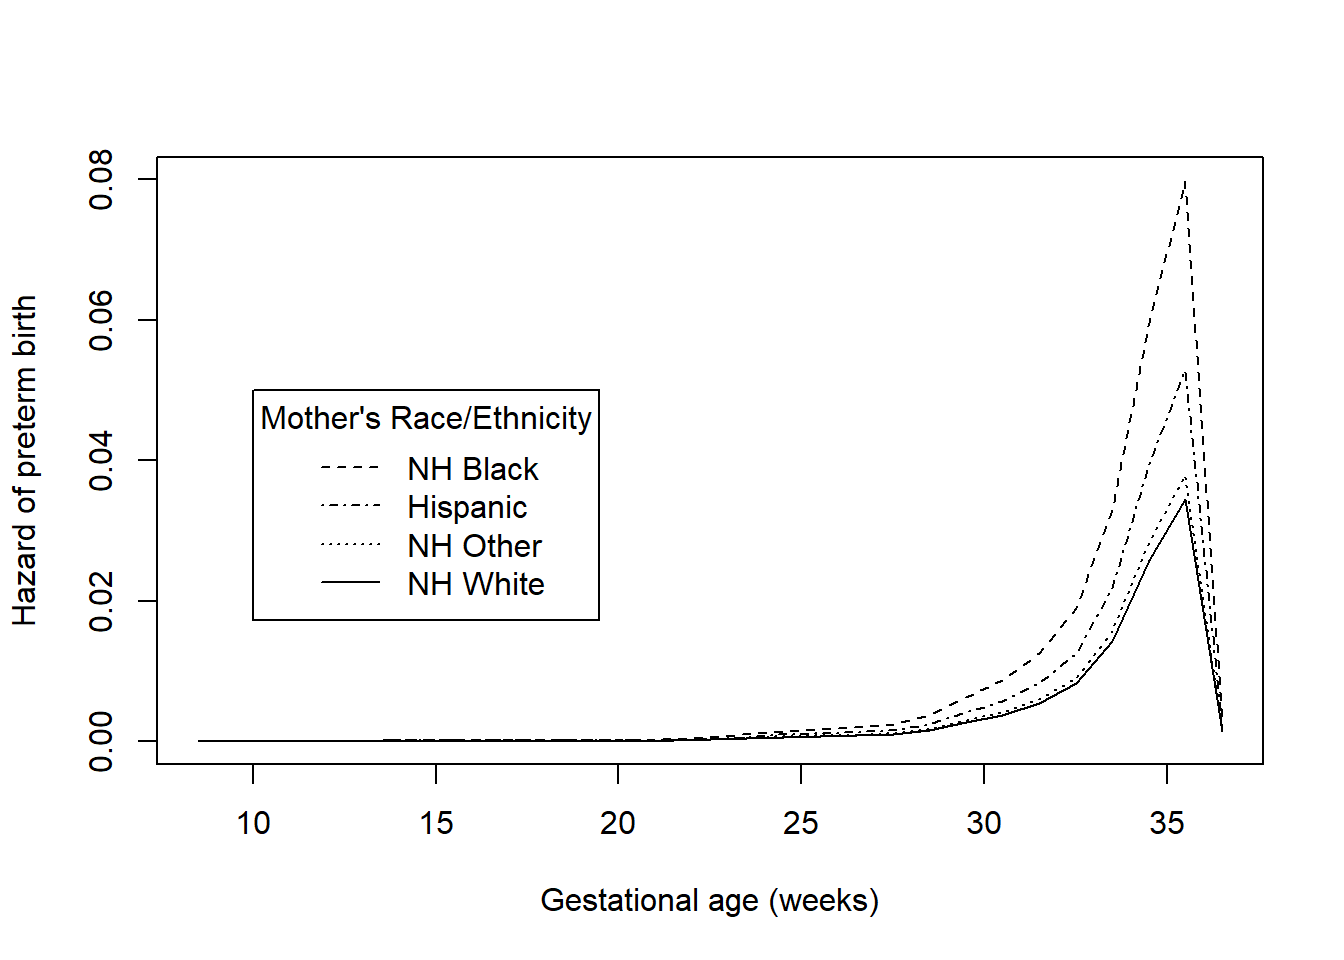 Hazard functions for time to preterm birth by race/ethnicity